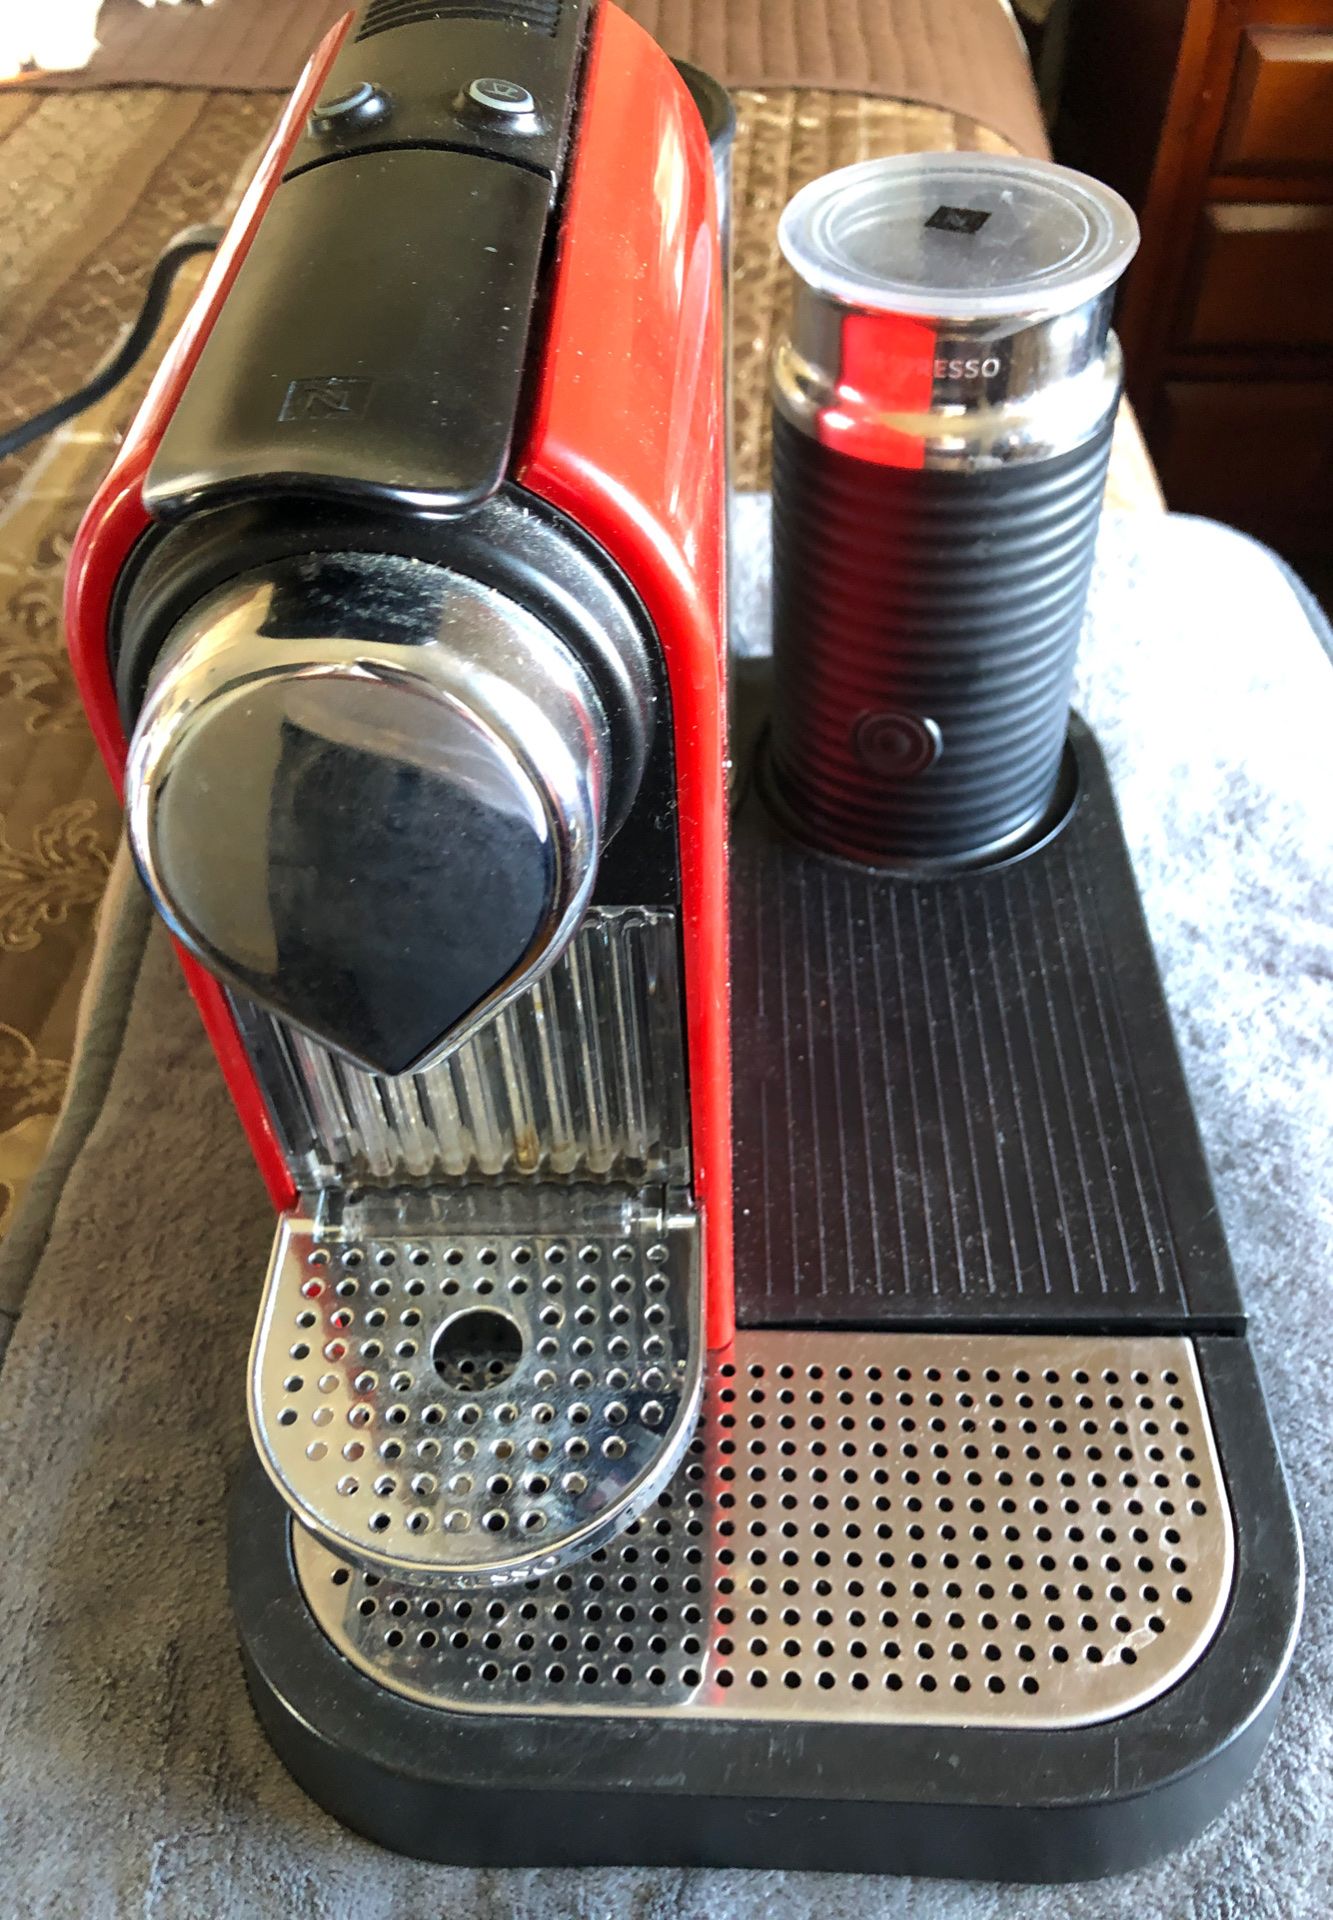 Nespresso coffee maker excellent condition used few times